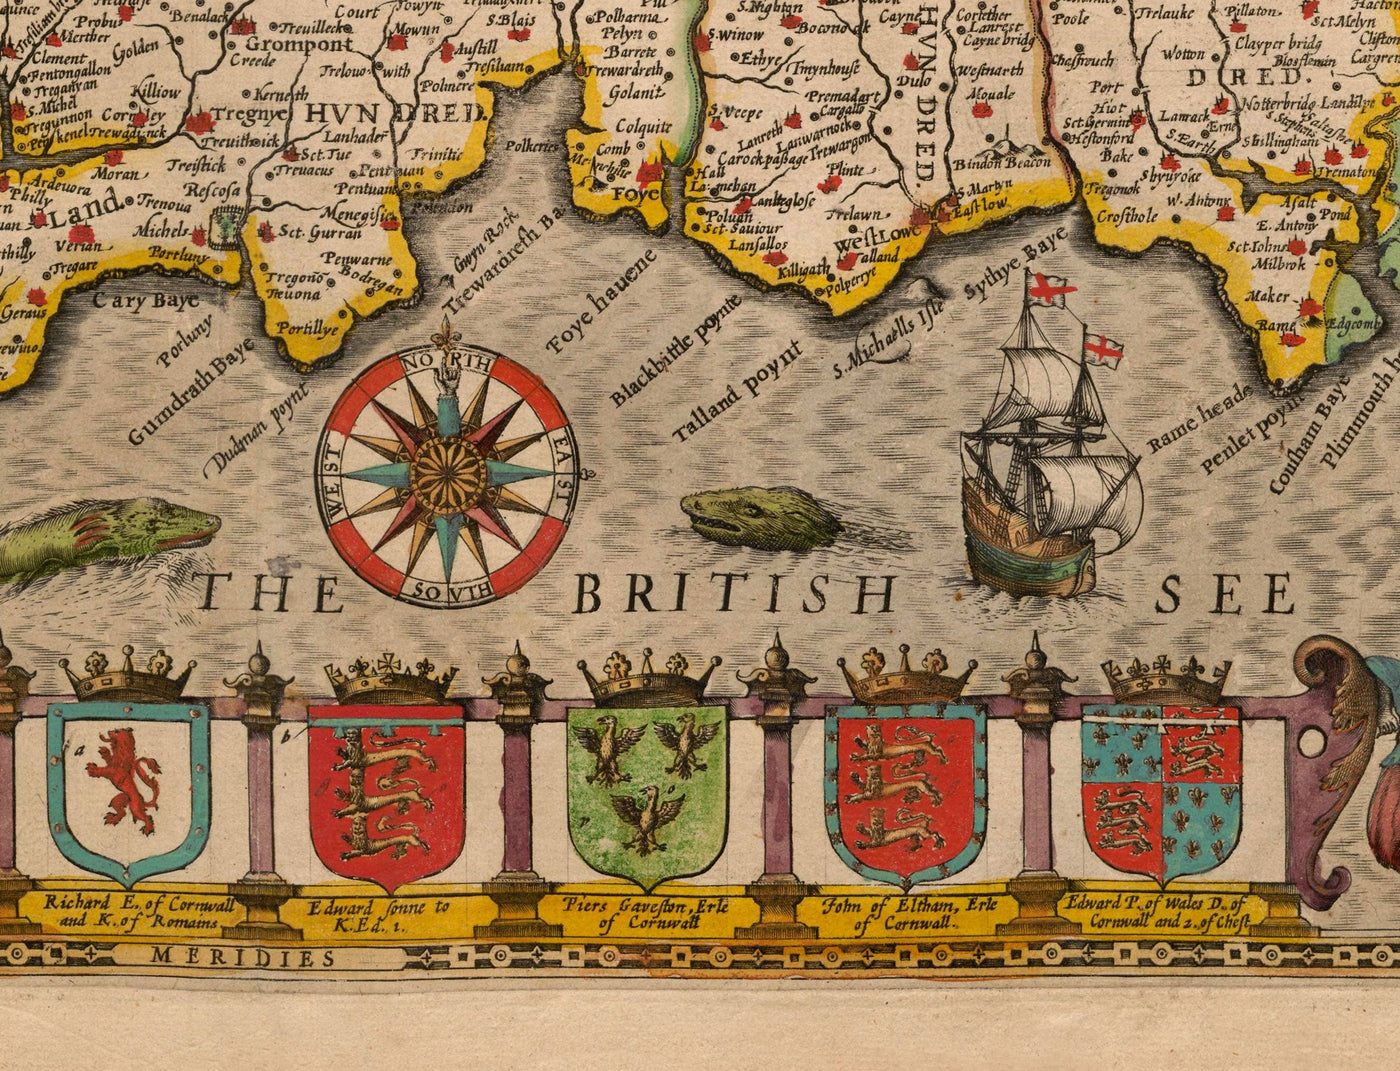 Old Map of Cornwall in 1611 by John Speed - Falmouth, Redruth, St Austell, Truro, Penzance